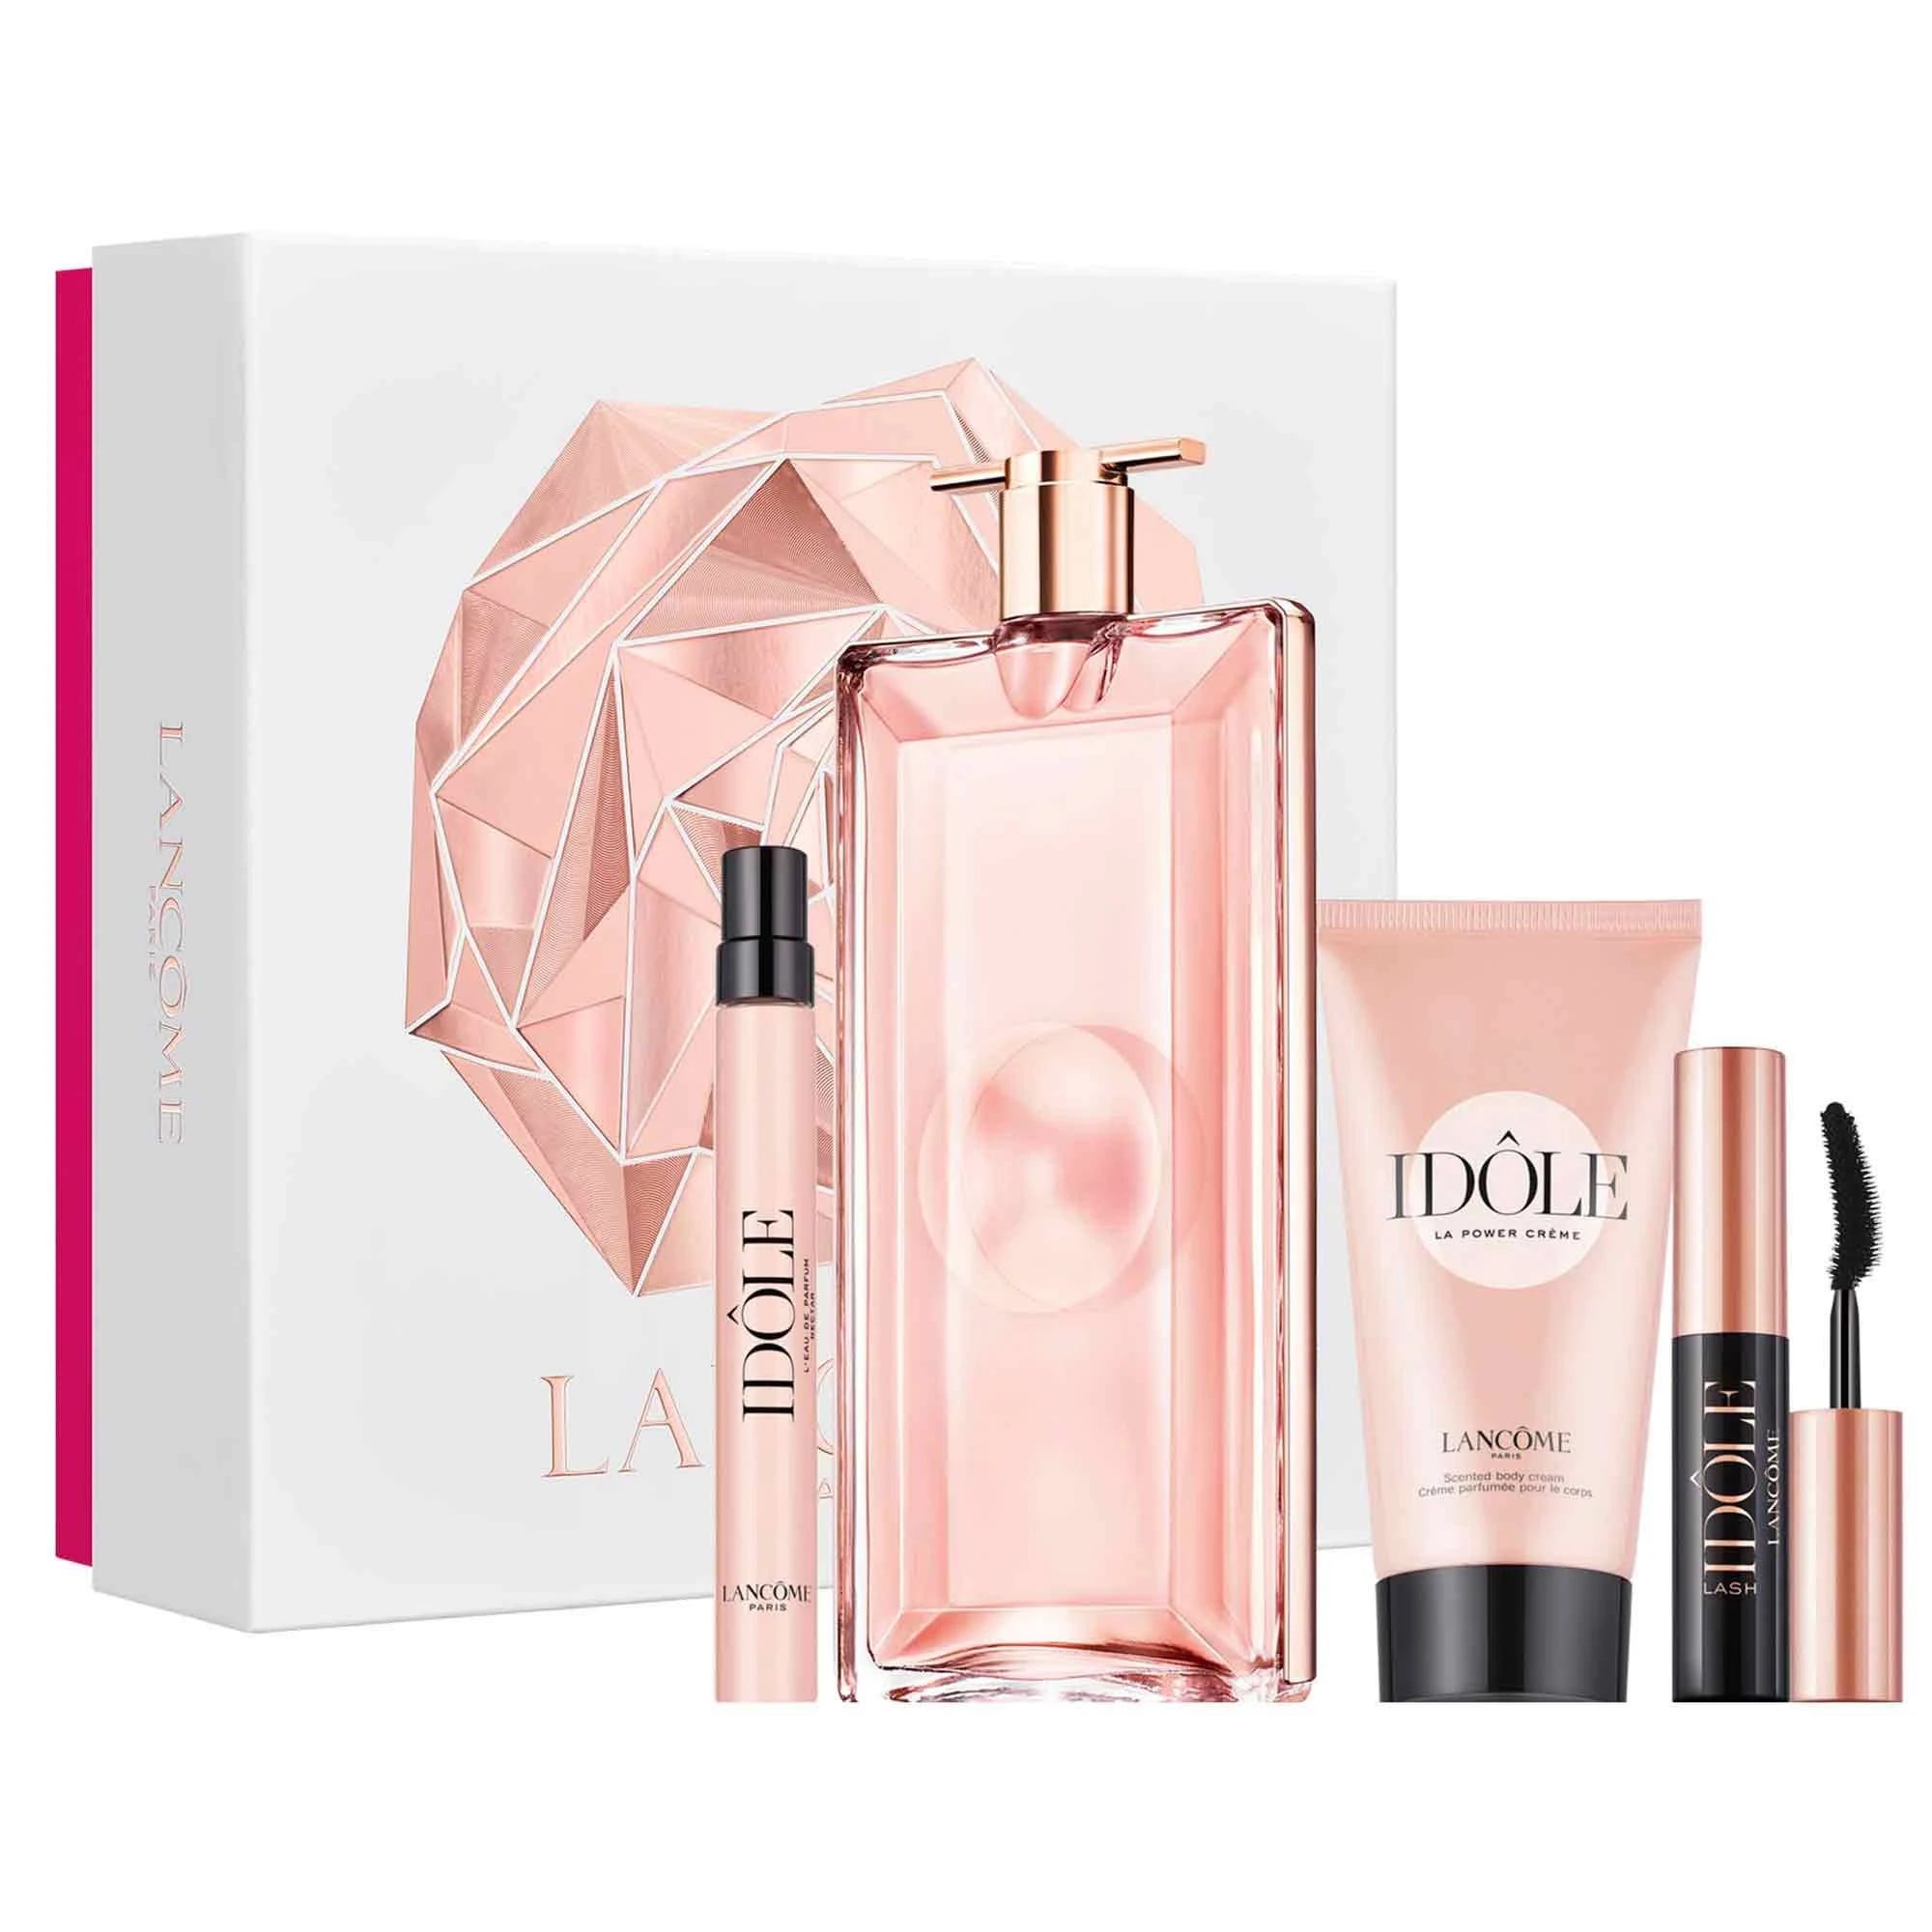 Fragrant Idôle Winter Gift Set by Lancome | Image